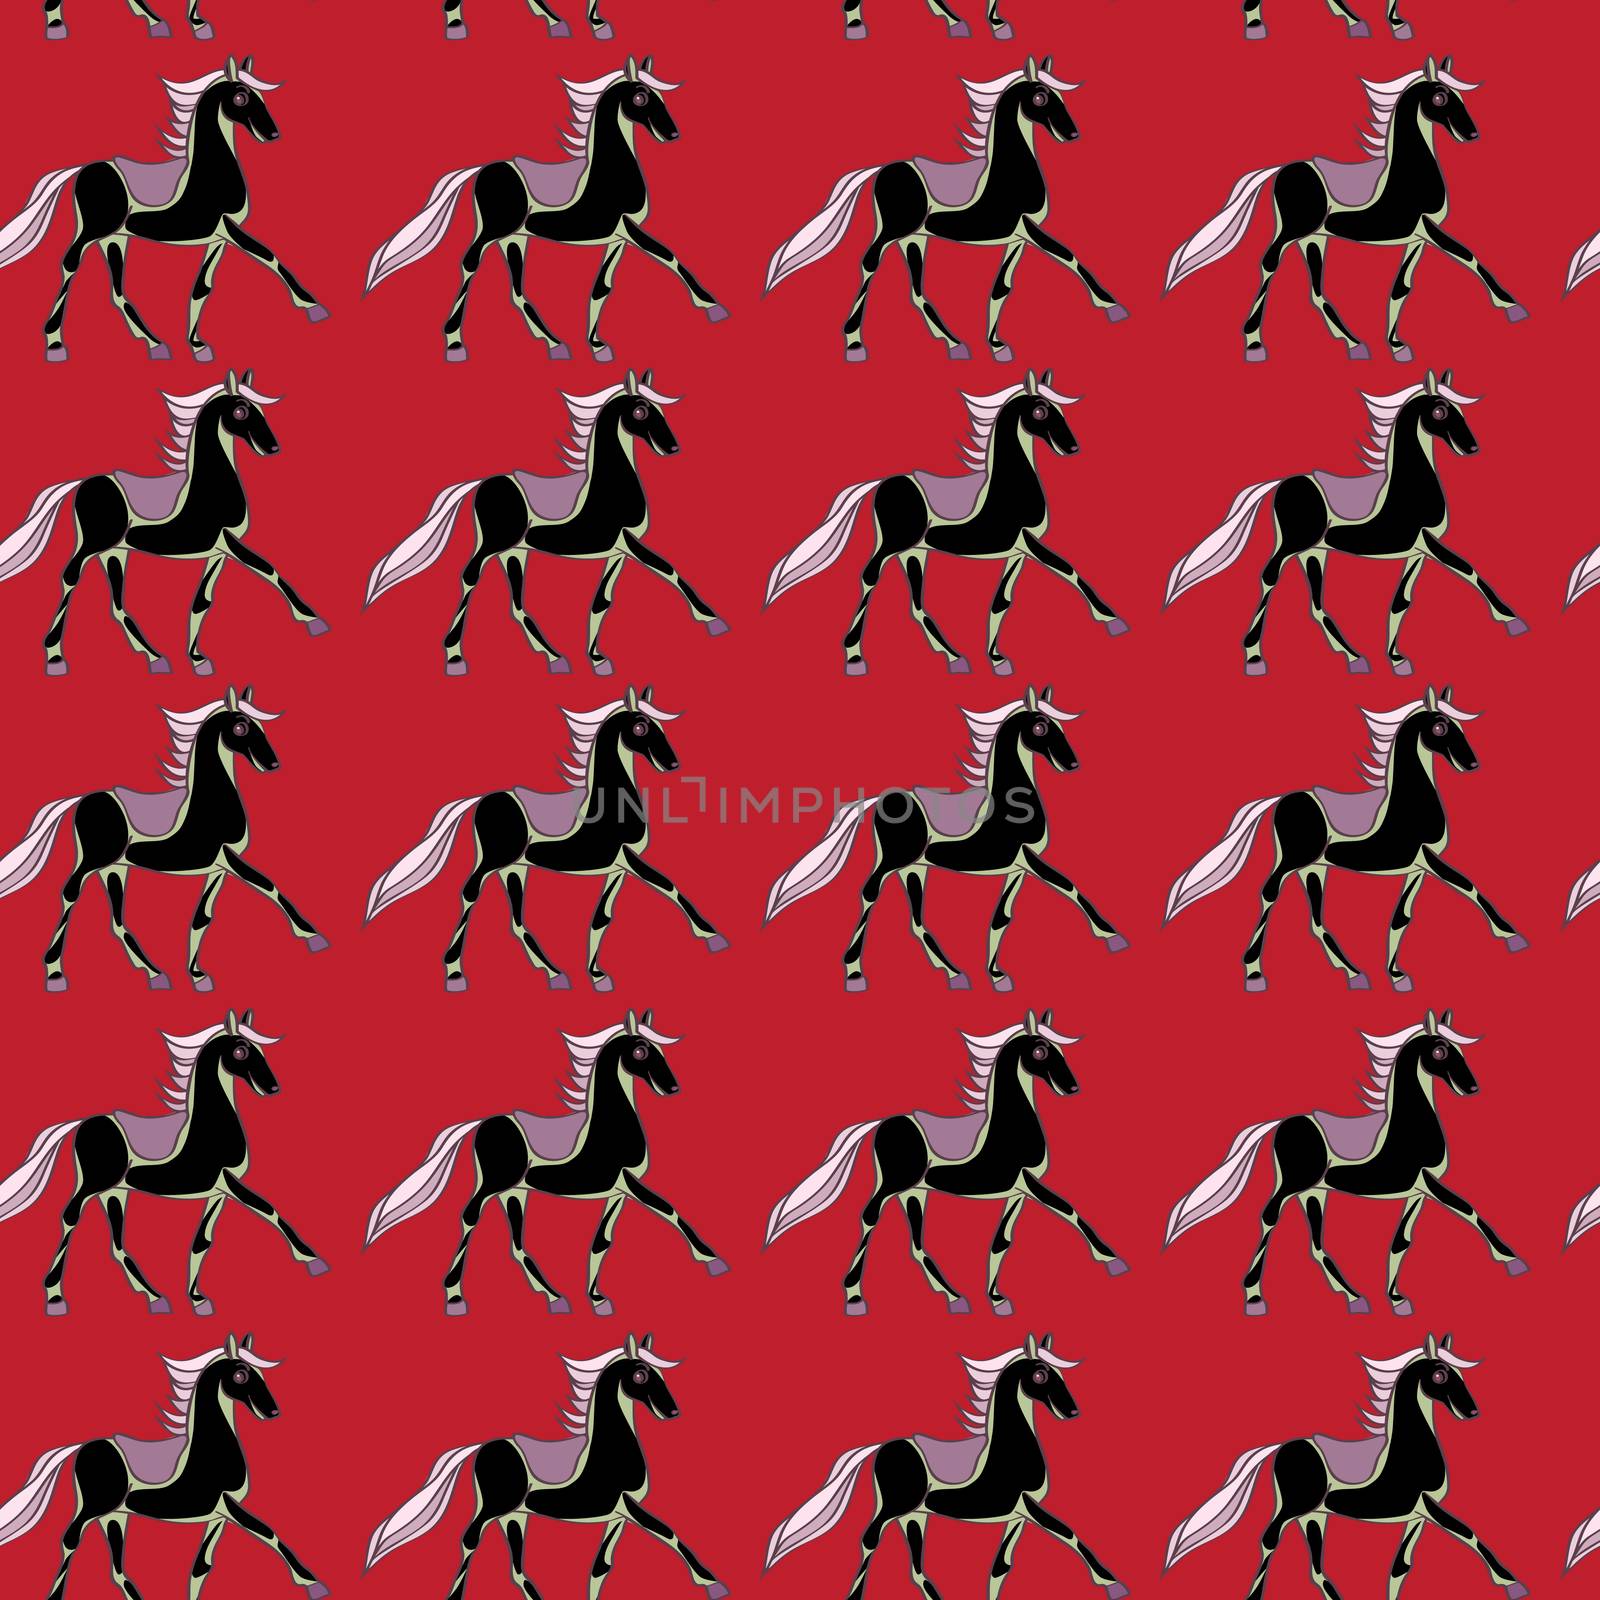 One horse seamless pattern, hand drawn cartoon illustration over red background